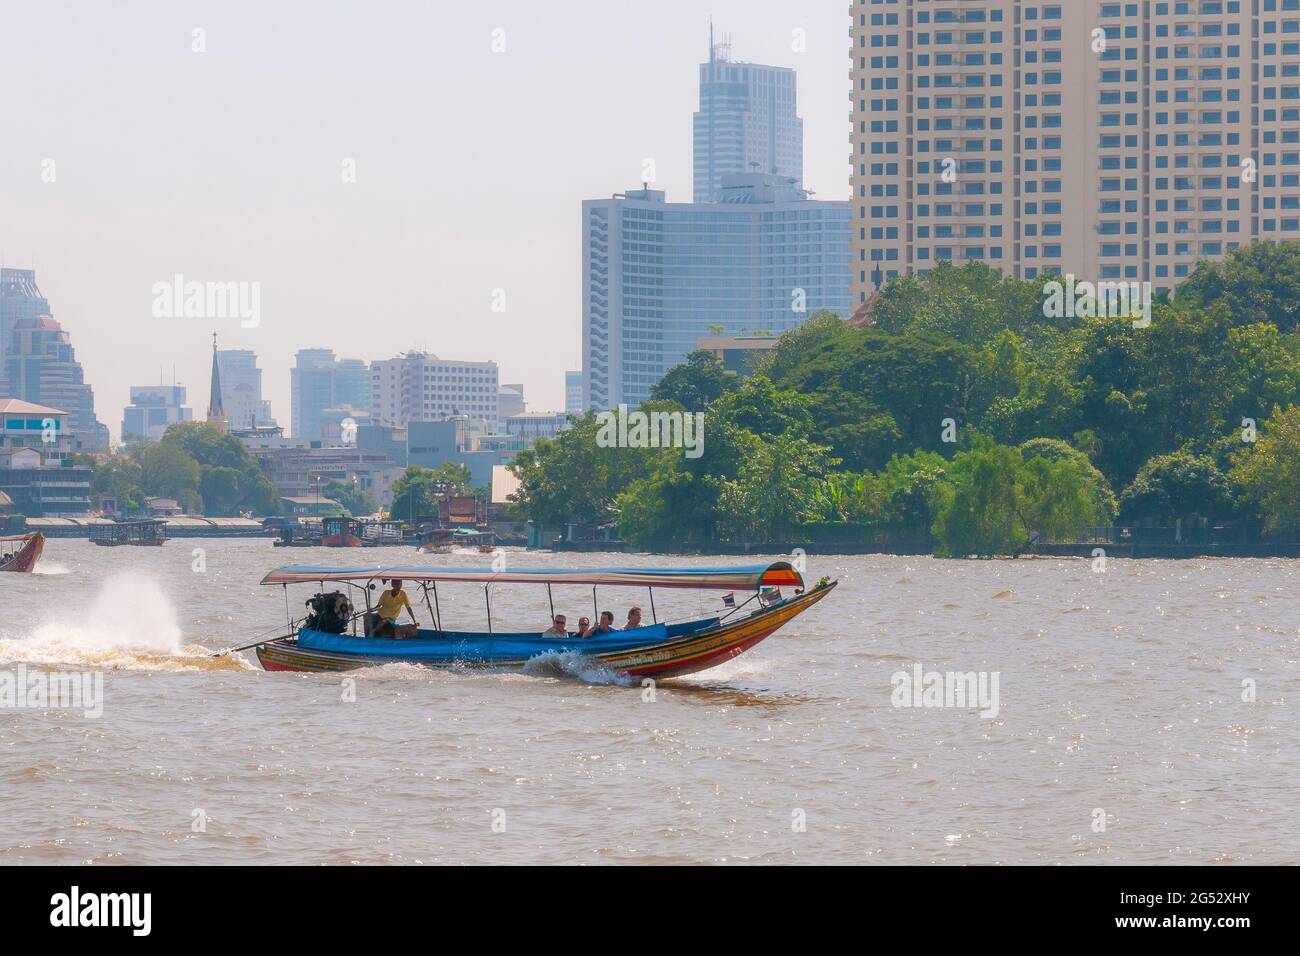 A traditional Thai long-tail boat on the Chao Phraya river in Bangkok in Thailand in South East Asia. Stock Photo